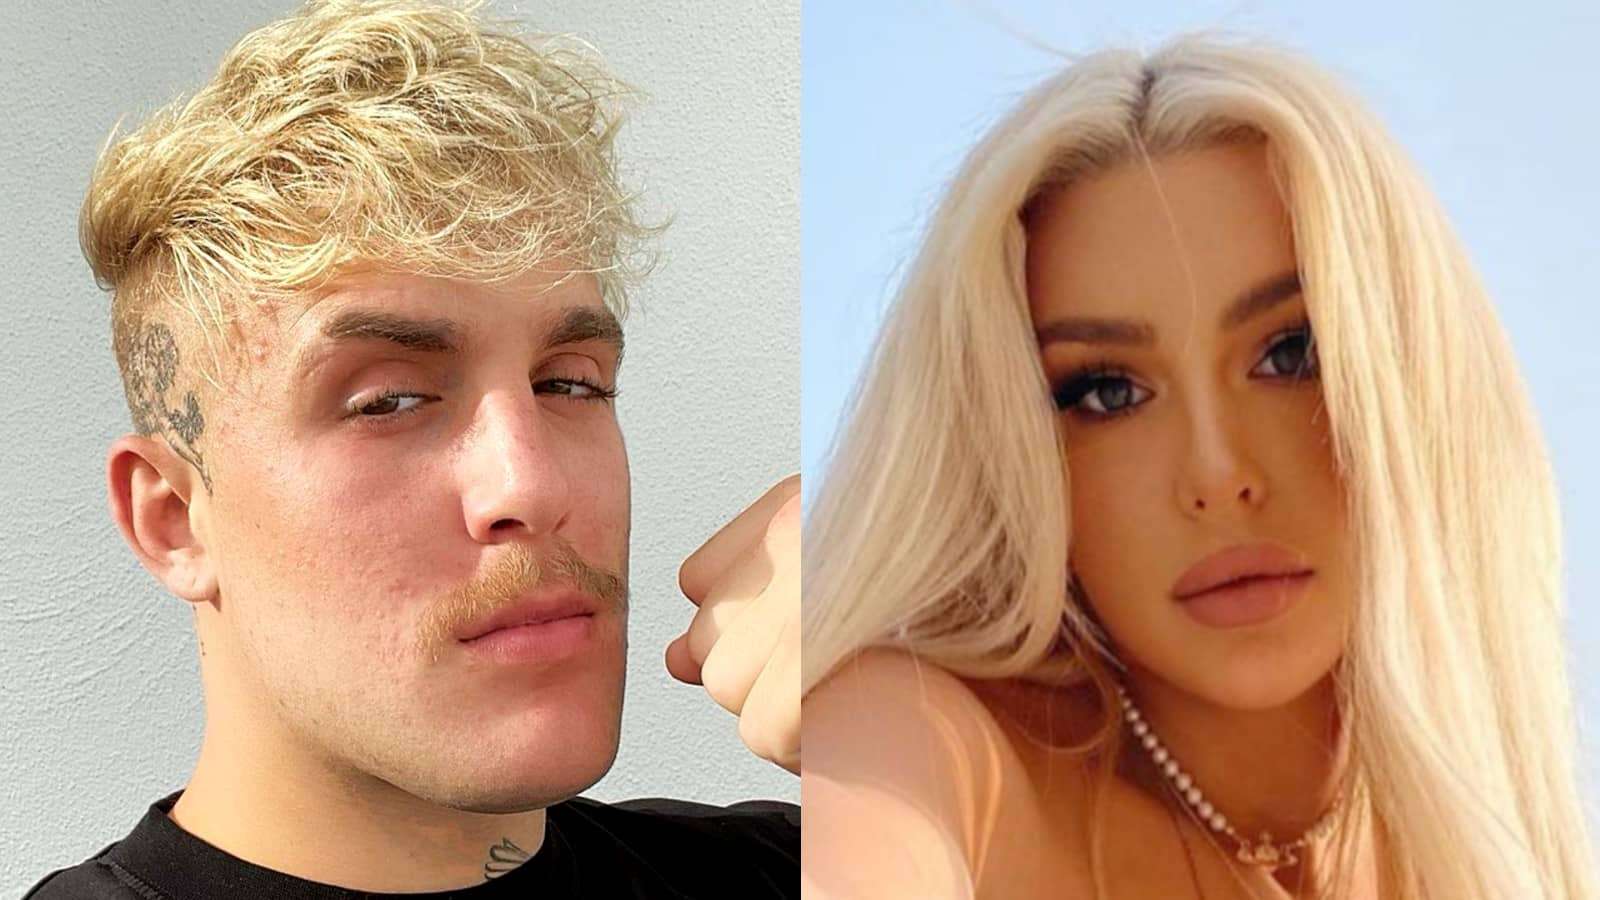 Jake Paul and Tana Mongeau next to each other